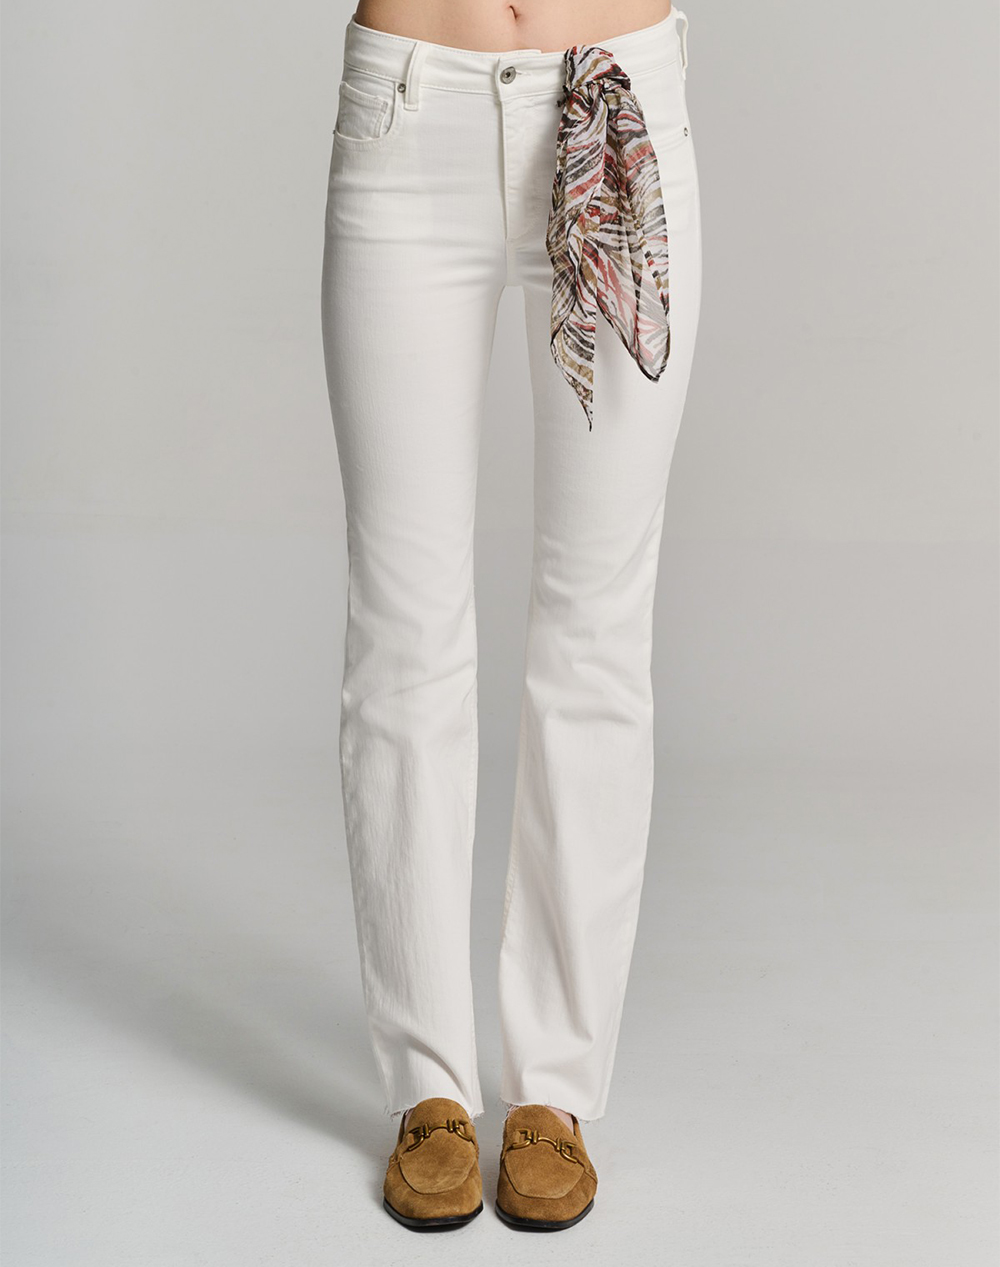 STAFF Beatrice Woman Pant 5-905.068.9.051-Ν0024 OffWhite 3810PSTAF2010248_60075